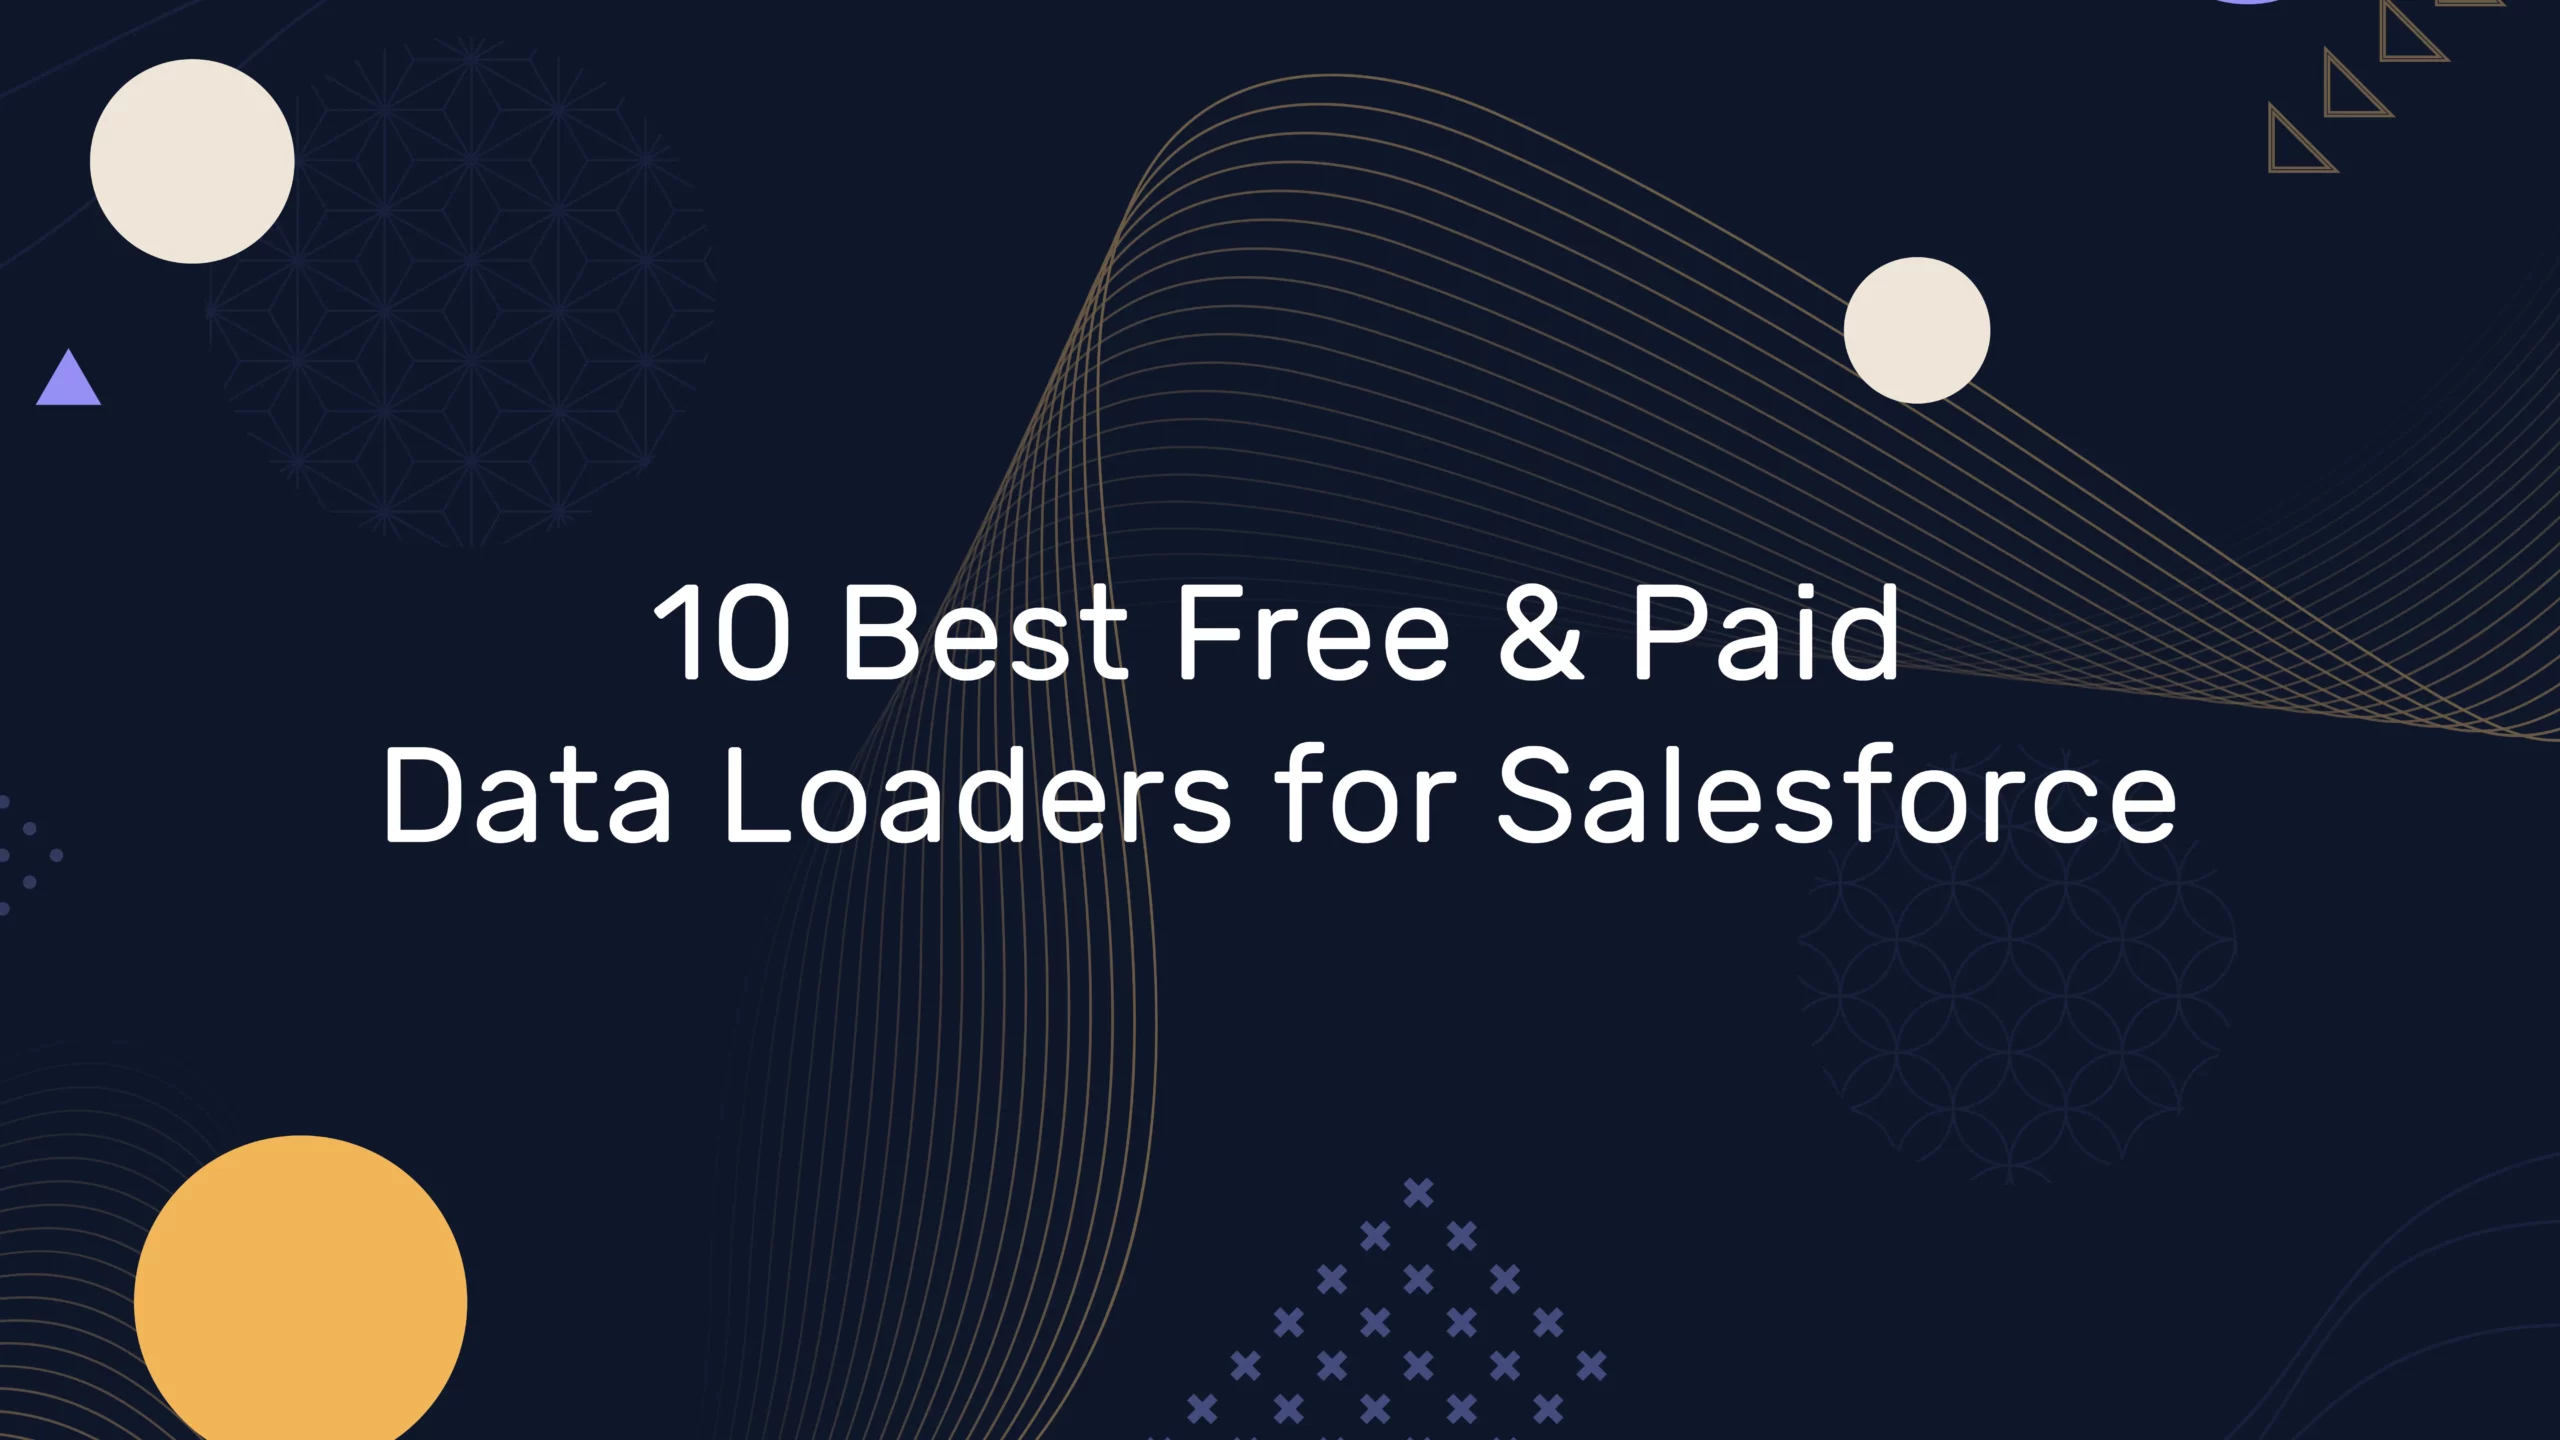 10 Best Free & Paid Data Loaders for Salesforce